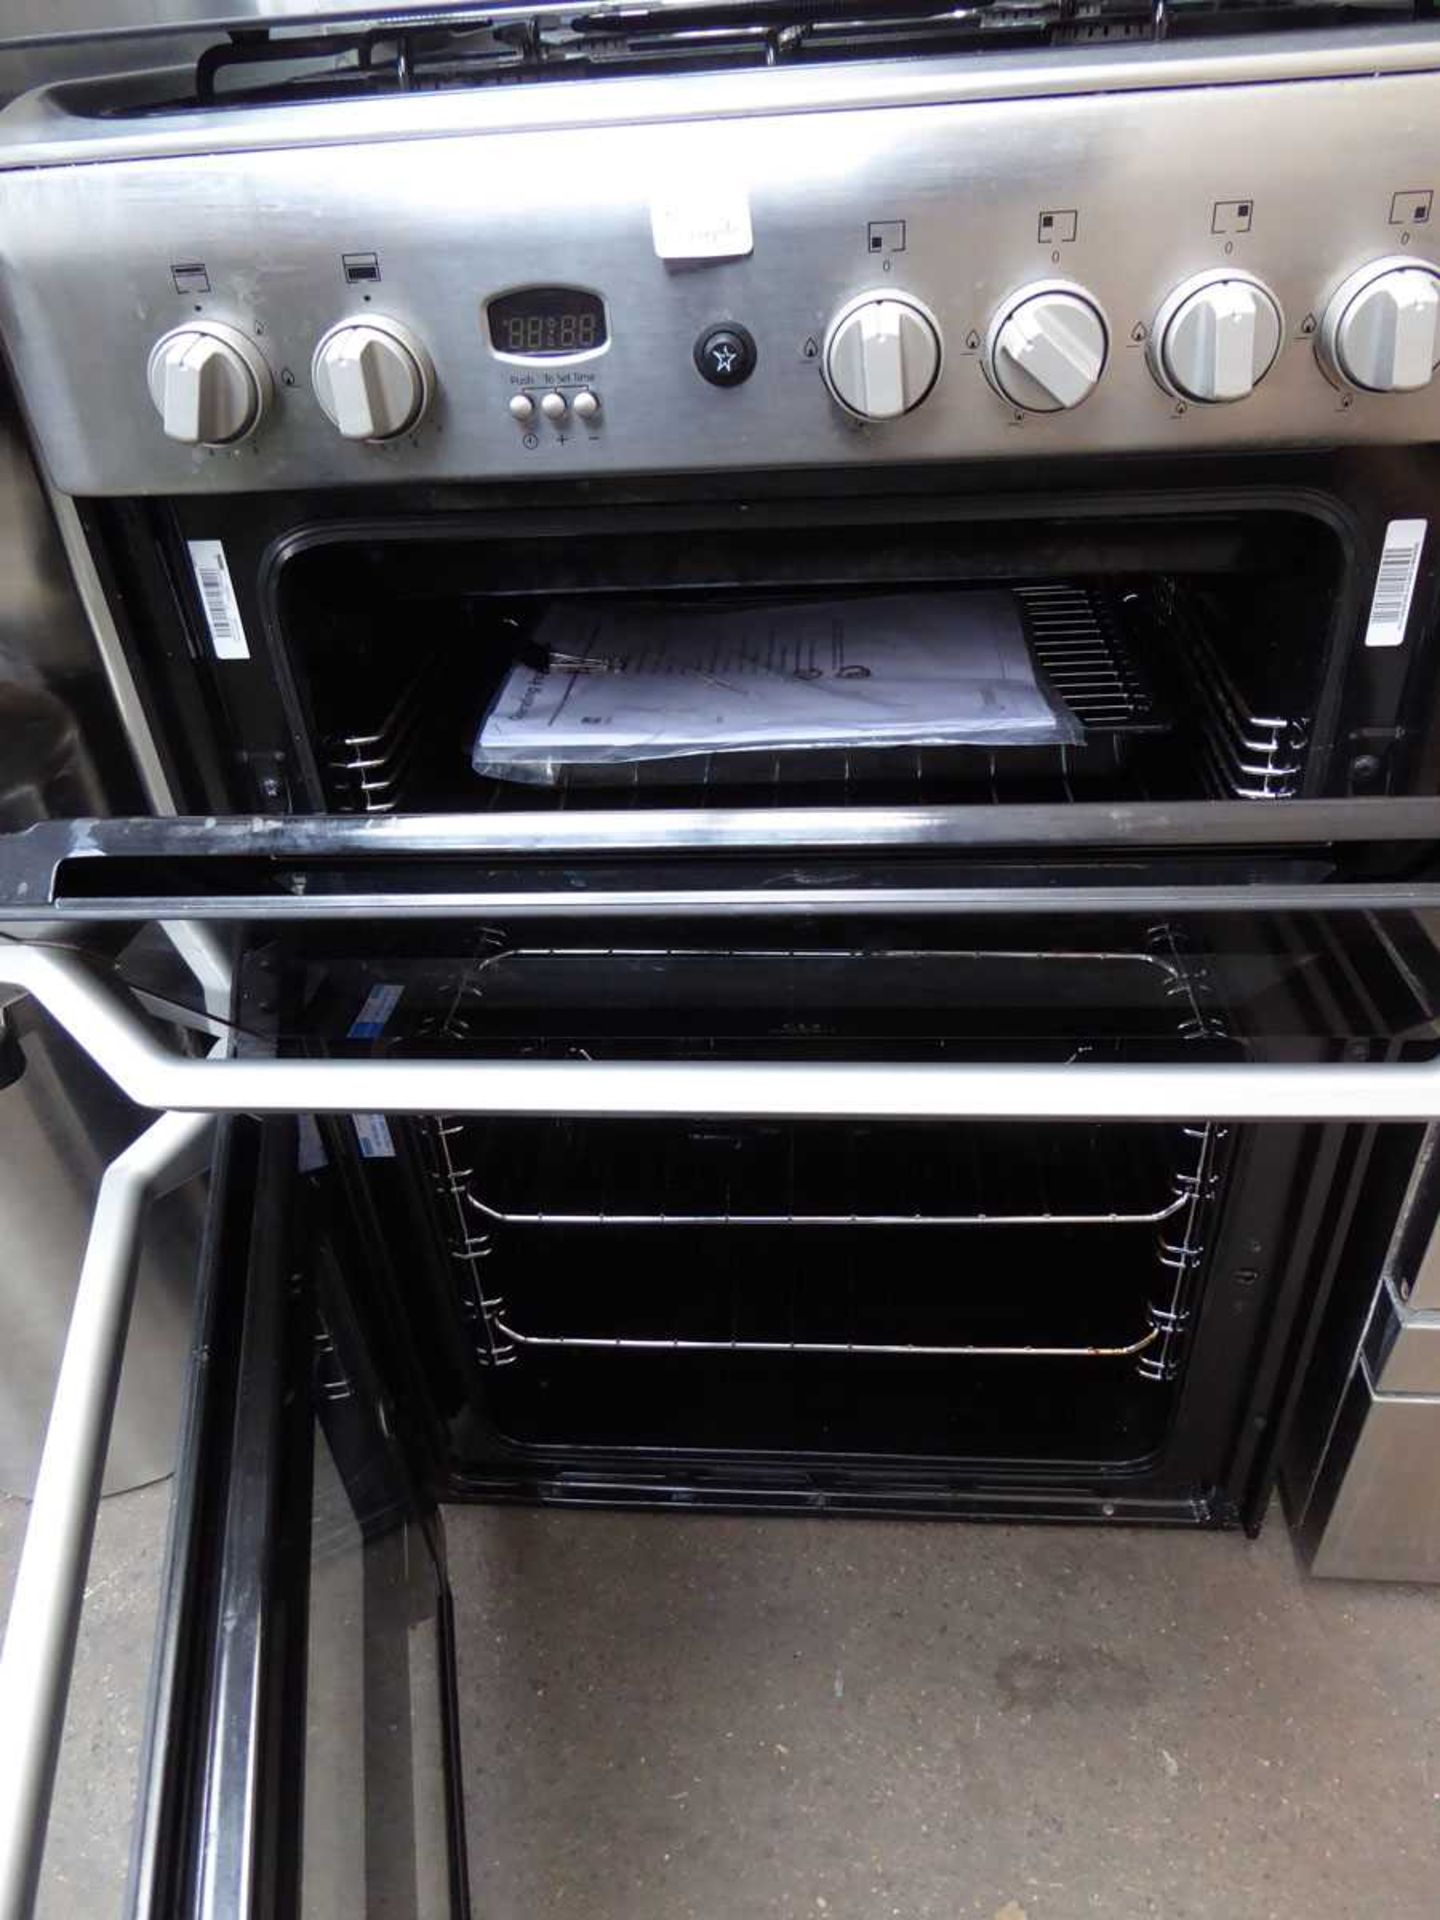 60cm gas domestic Indesit cooker with 4 burner top and and 2 ovens under - Image 2 of 2